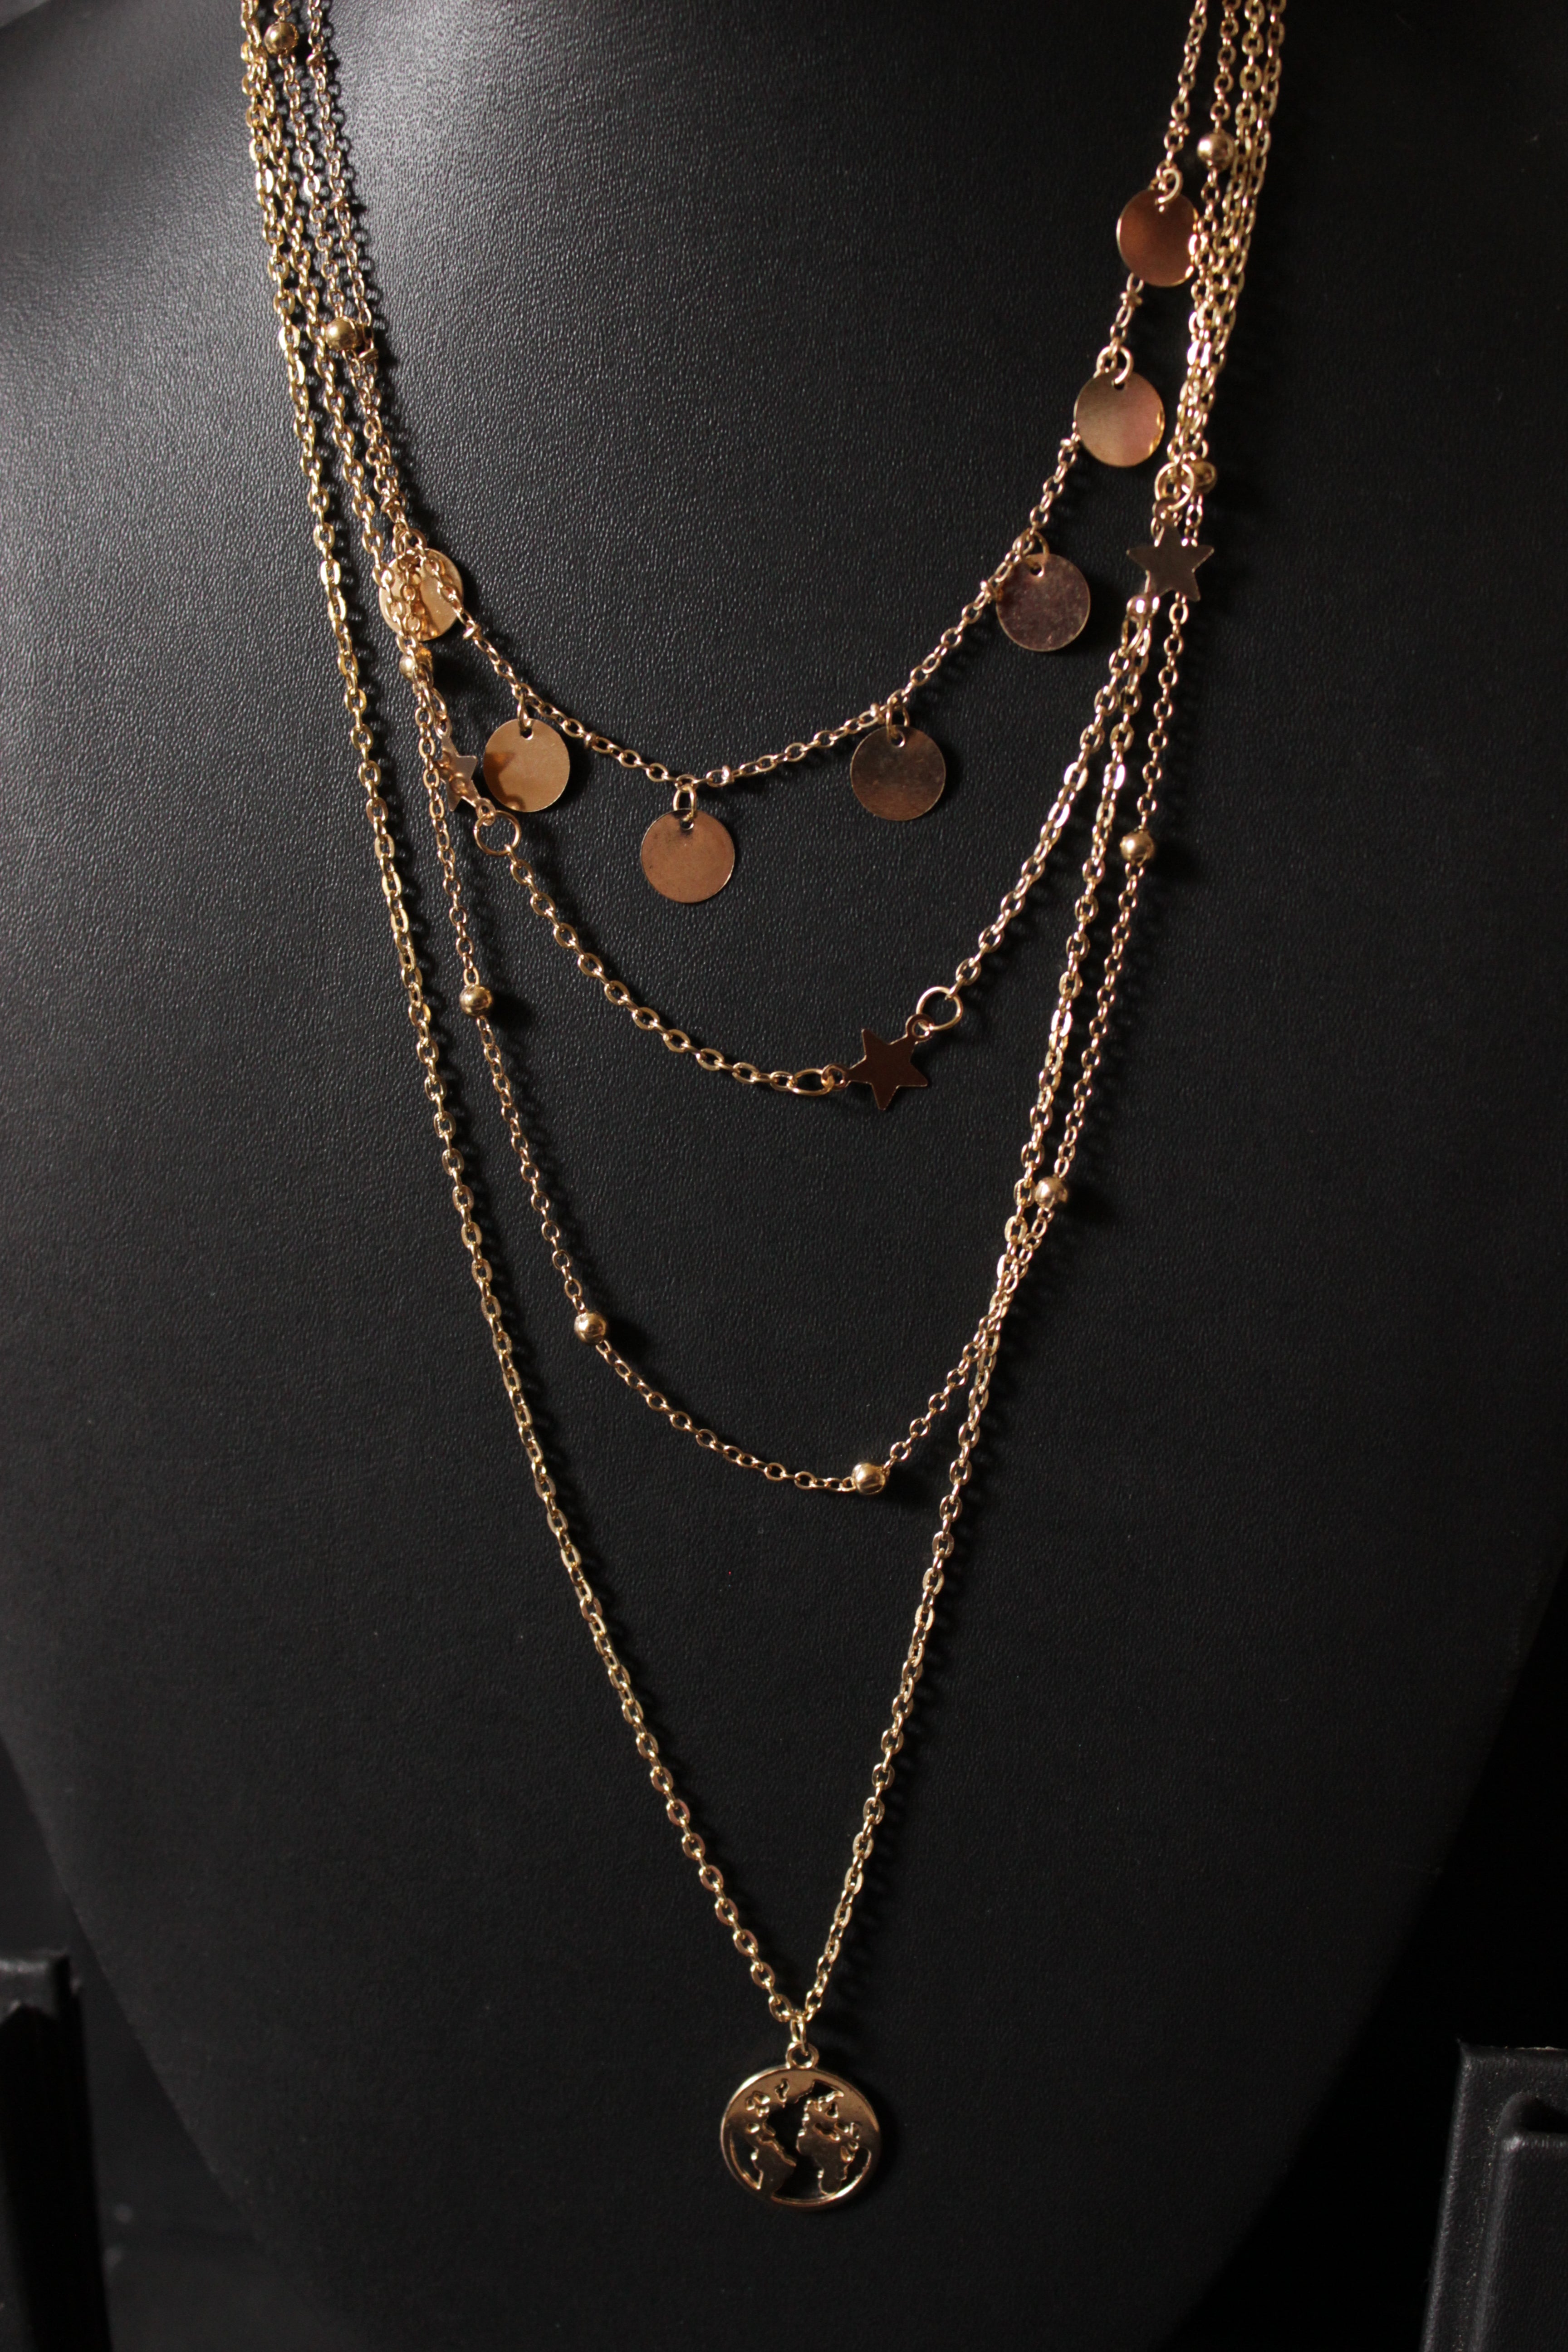 4 Layered Exquisite Gold Plated Multi Strand Necklace